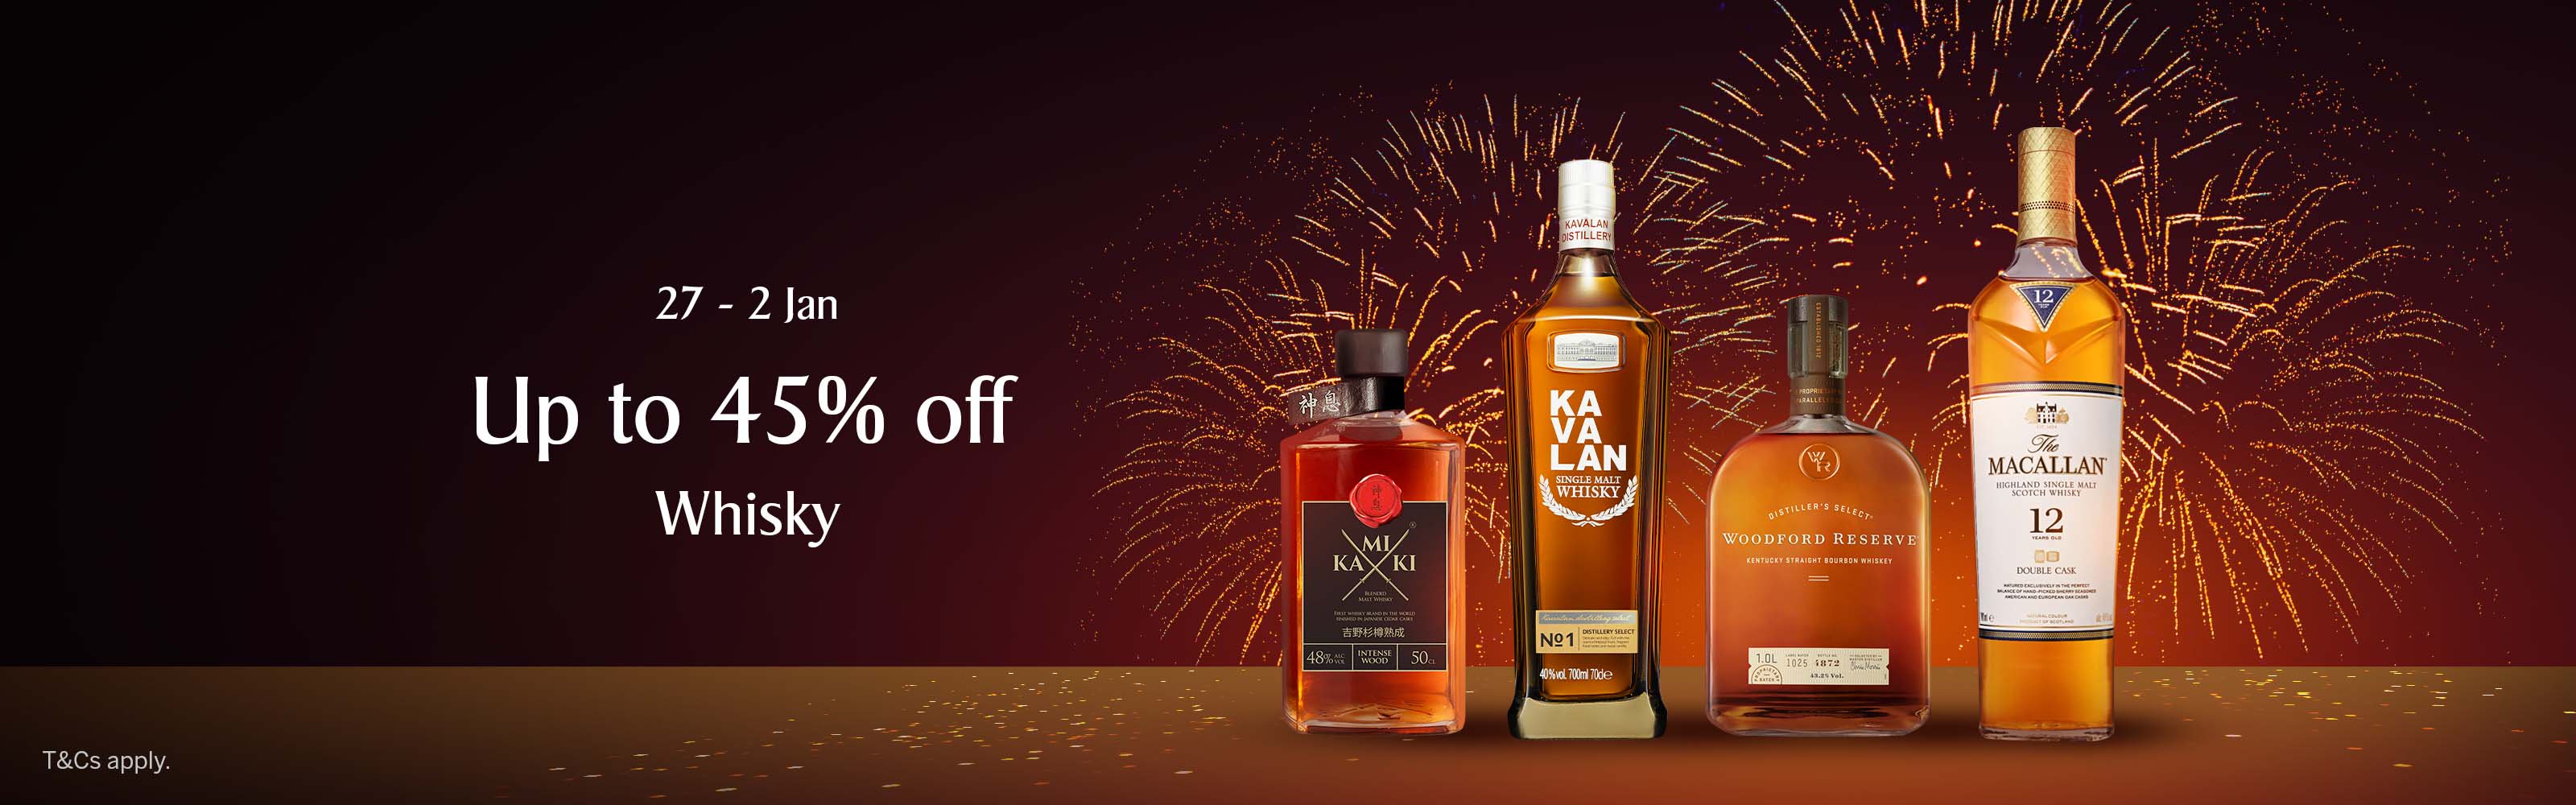 Up to 45% off Whisky